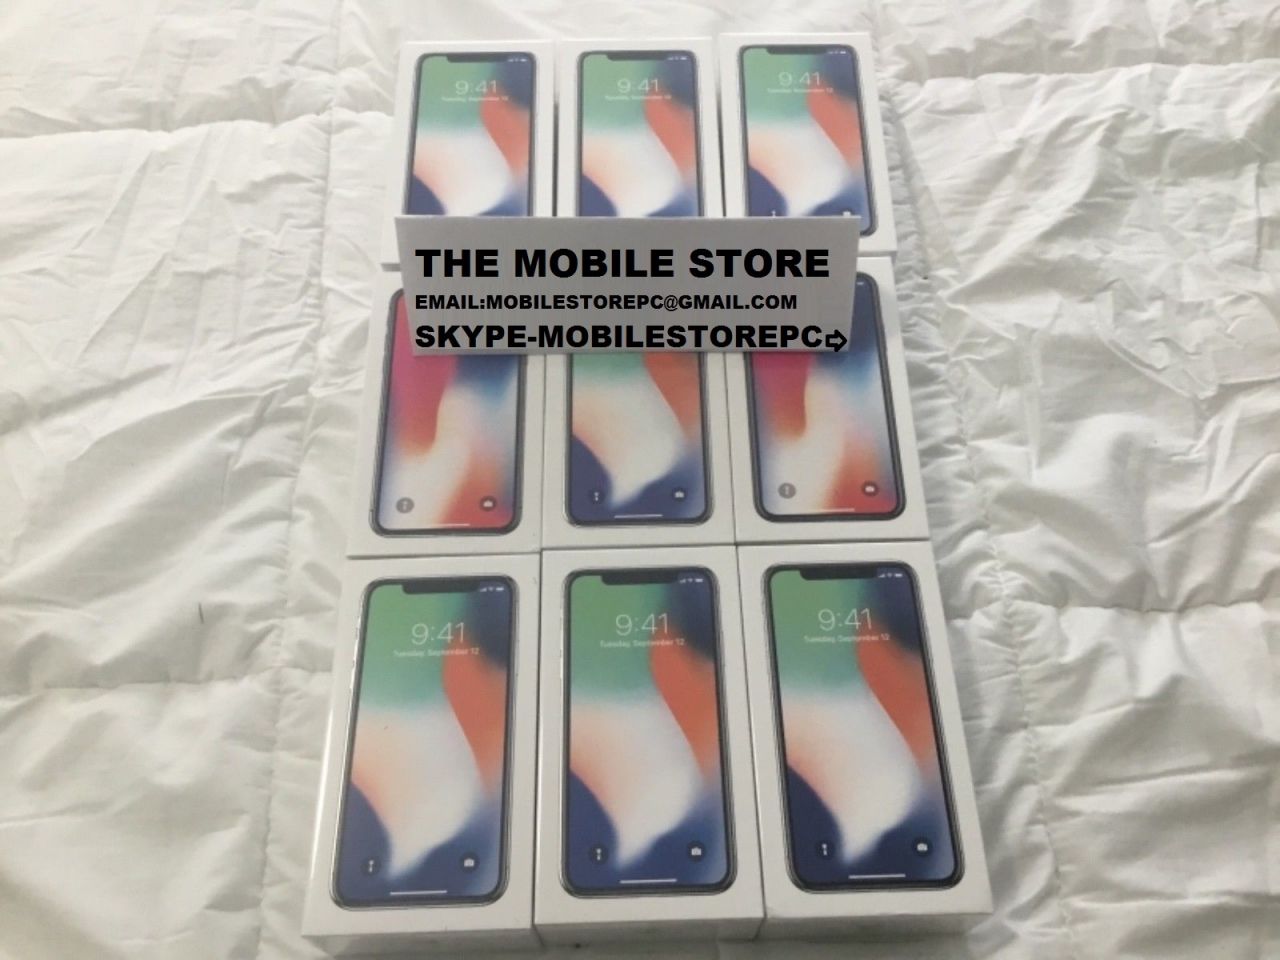 Buy Now  20% Discount off .
INFO - Sales Agent  : Call & WhatapppChat  + 1 782 826-0203

Apple iPhone X 64GB - $500 plus VAT ( Free Gift Apple smart iwatch  )
Apple iPhone 